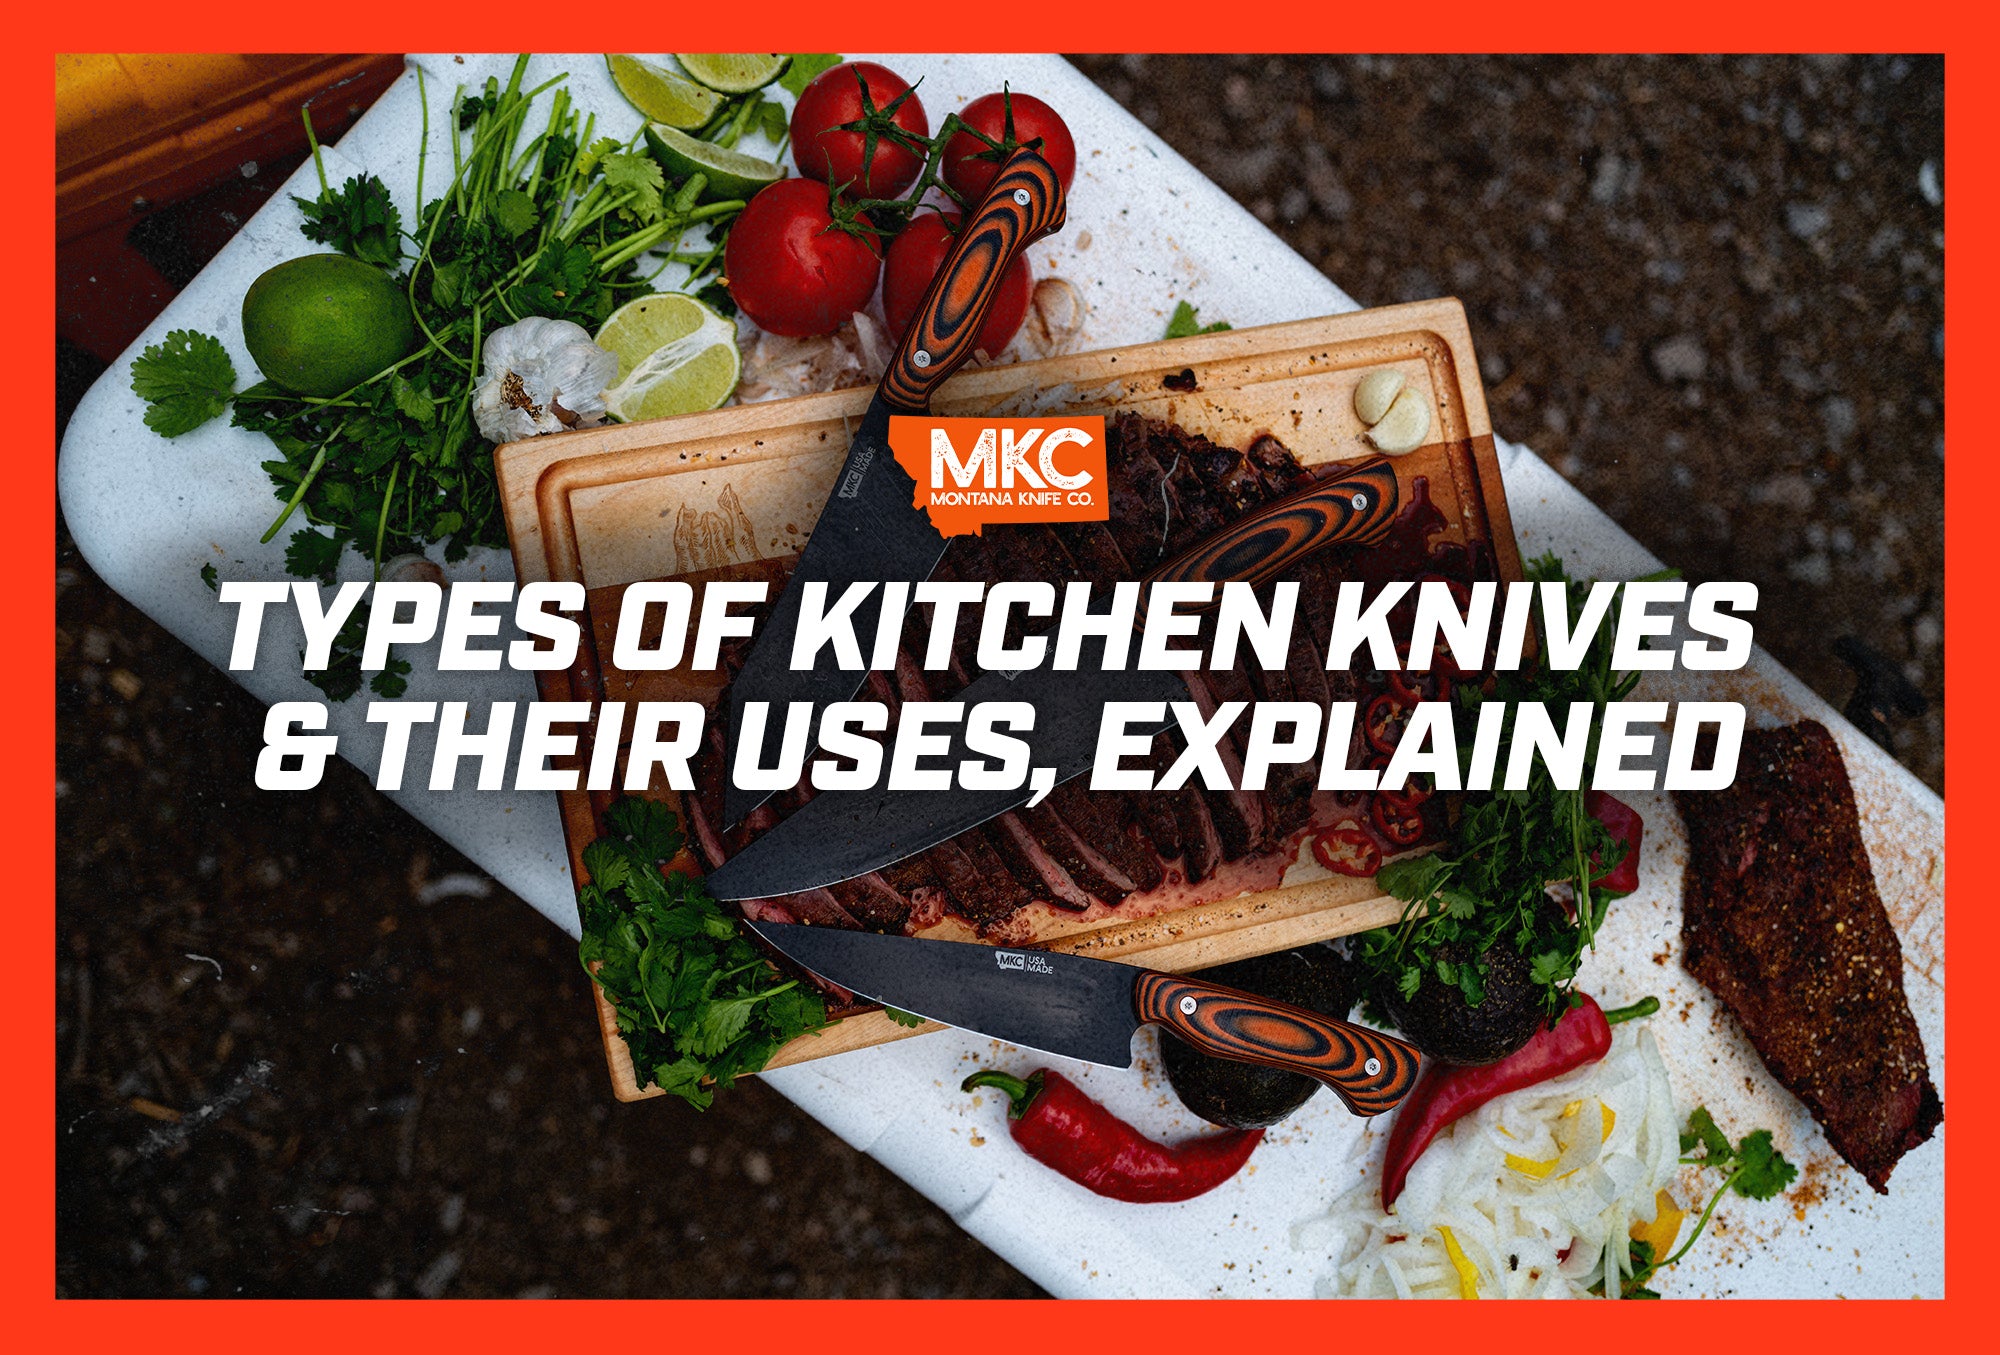 A white cutting board holds veggies, meat, a small wood cutting board, and three types of kitchen knives from MKC.